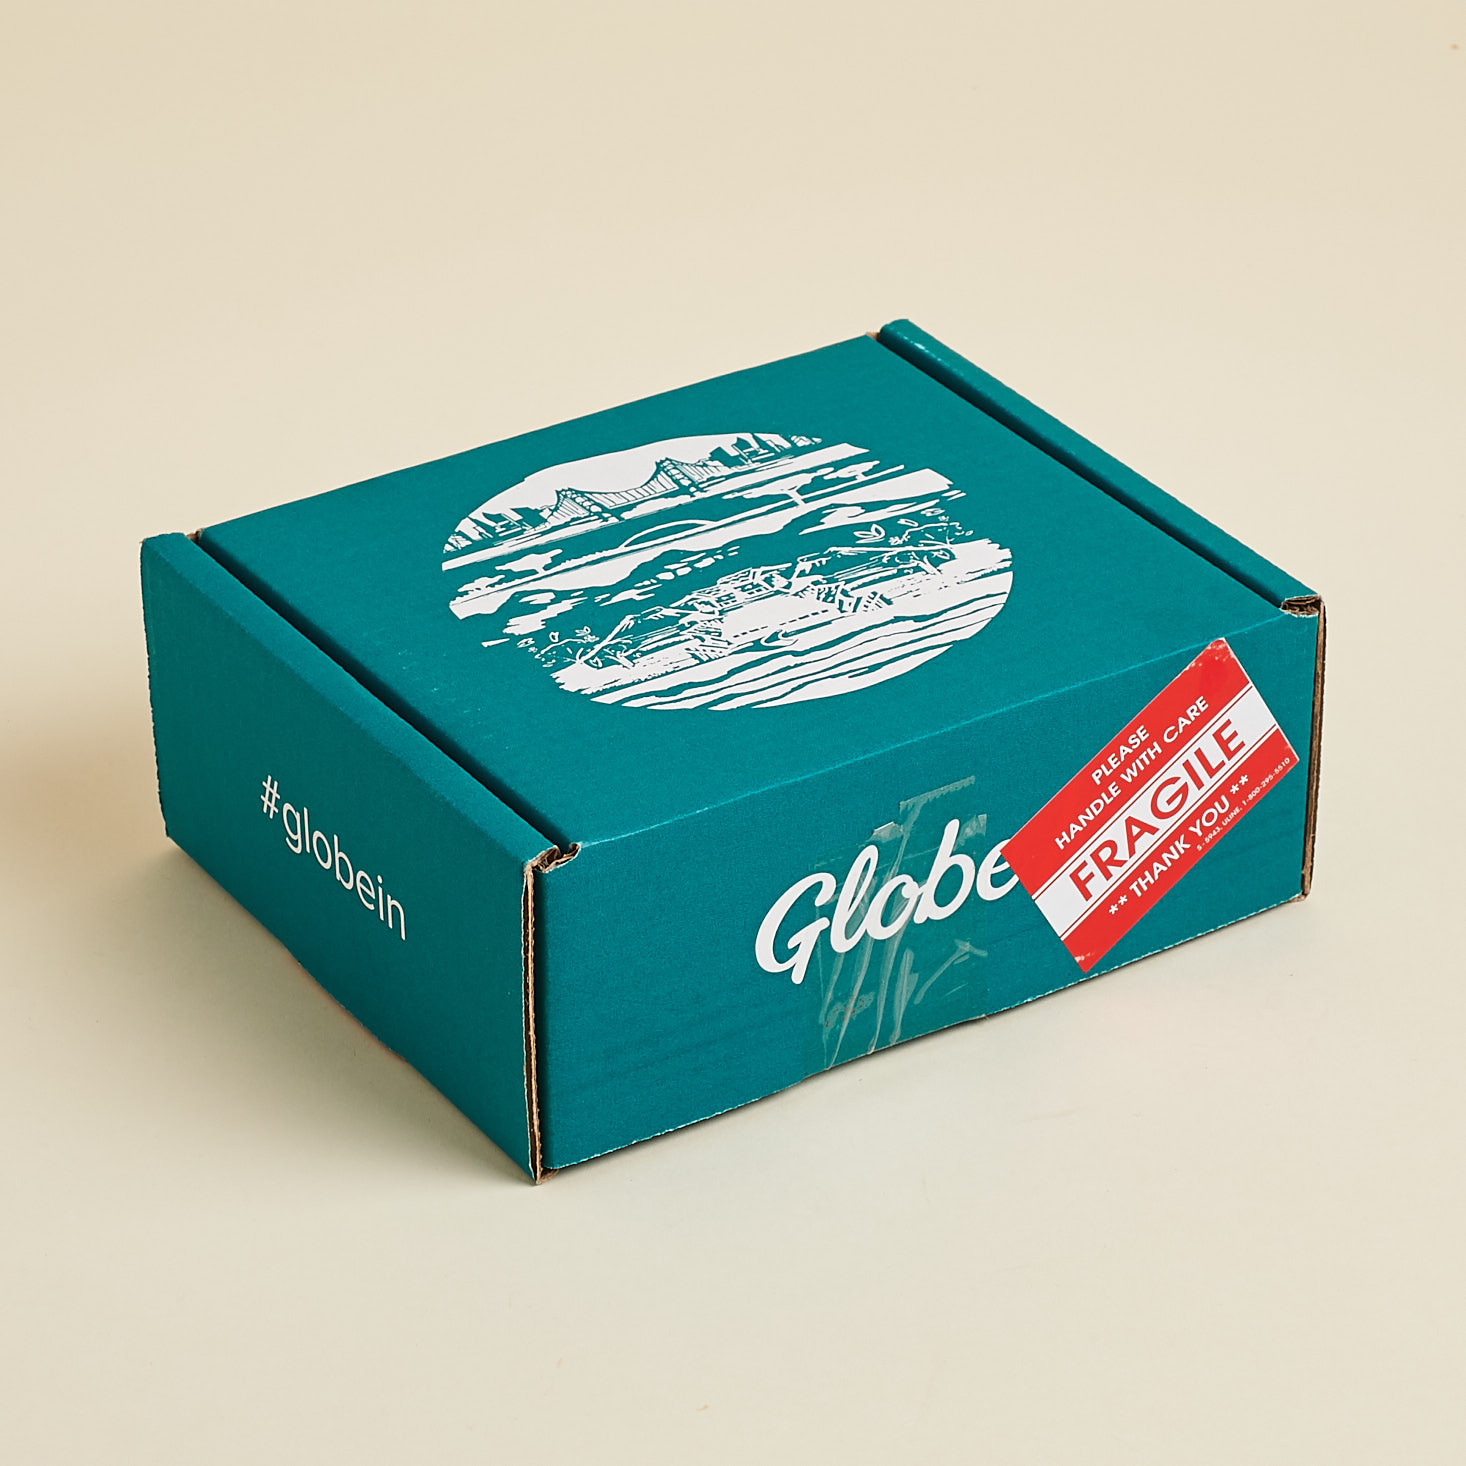 GlobeIn Limited Edition “Thanks Dad” Father’s Day Gift Box Review – June 2018